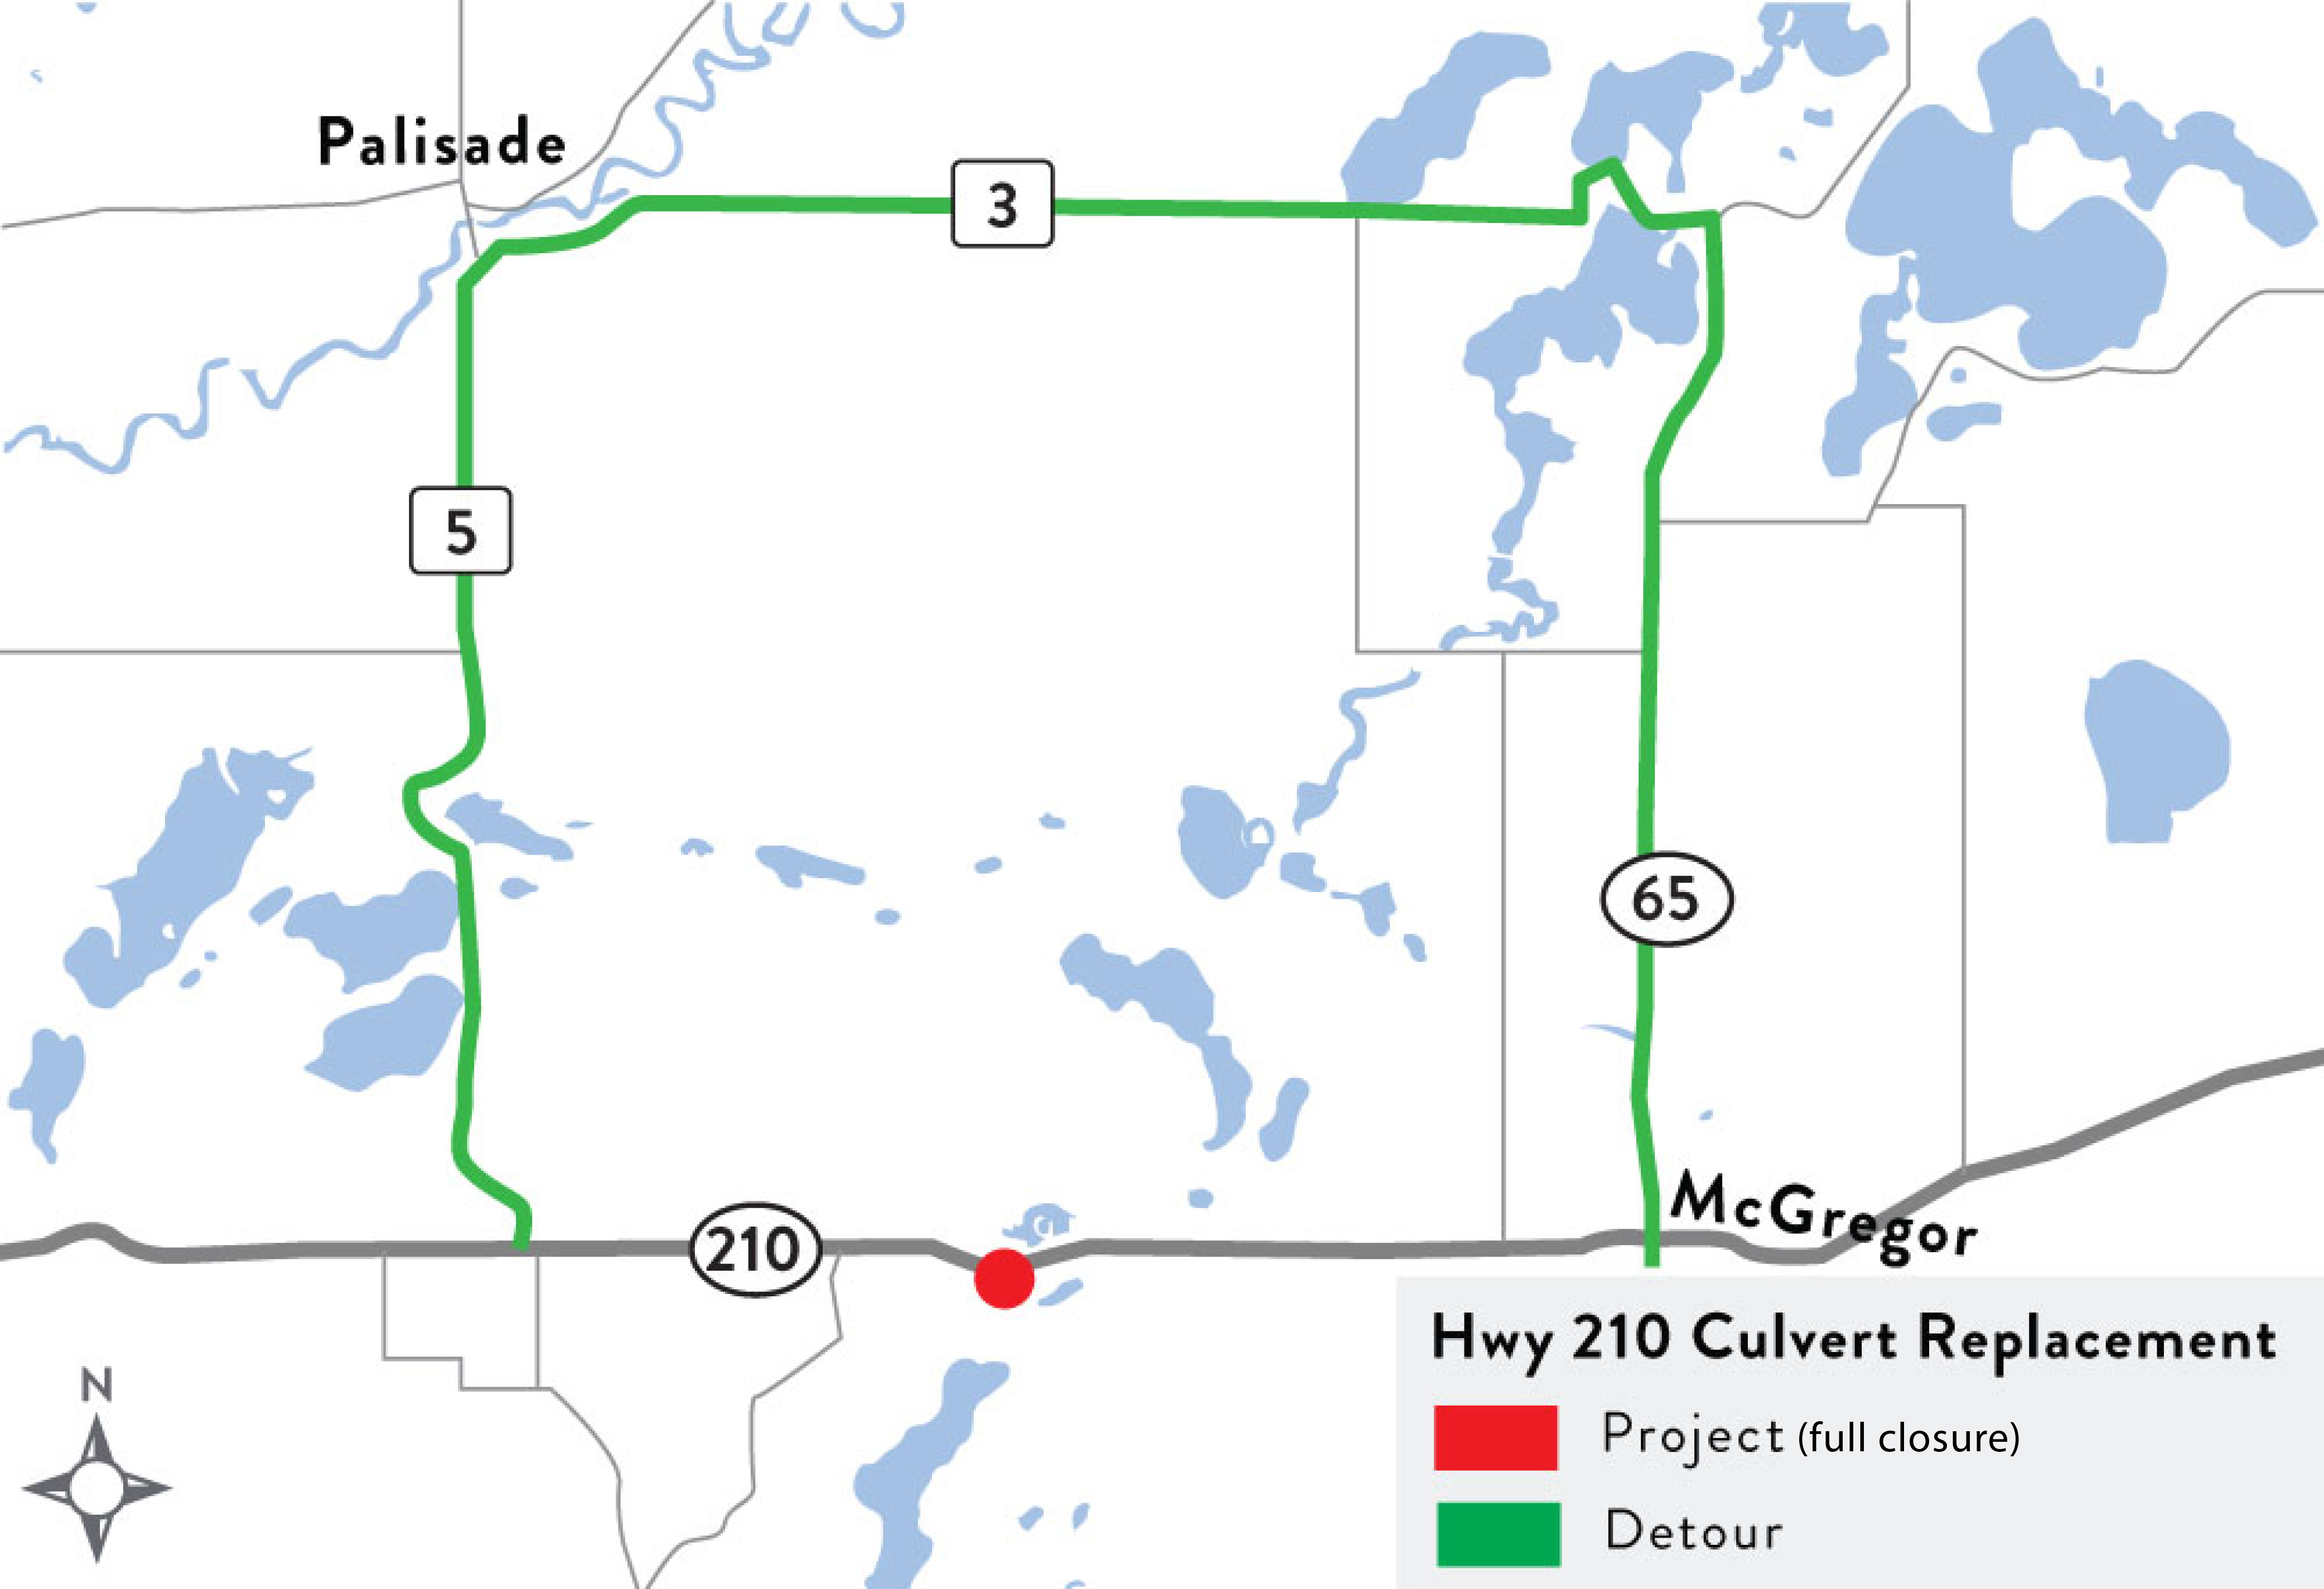 A rendering of the Hwy 210 box culvert replacement and detour.